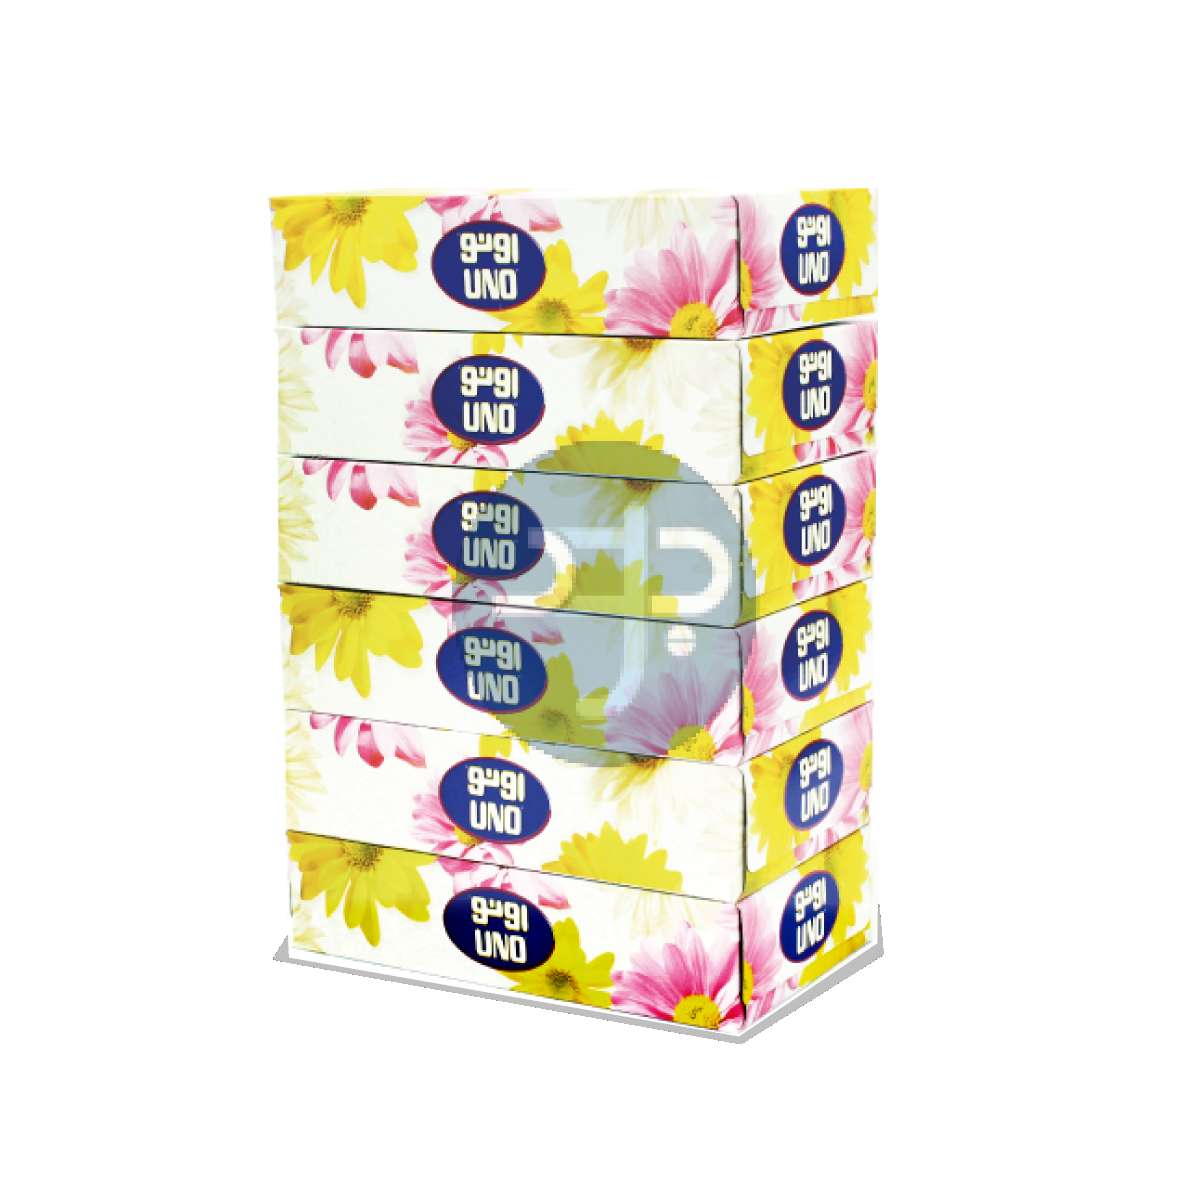 Product-UNO Plus Hard-Pack Facial Tissue, 100 Sheets x 2 Ply,6 Pcs